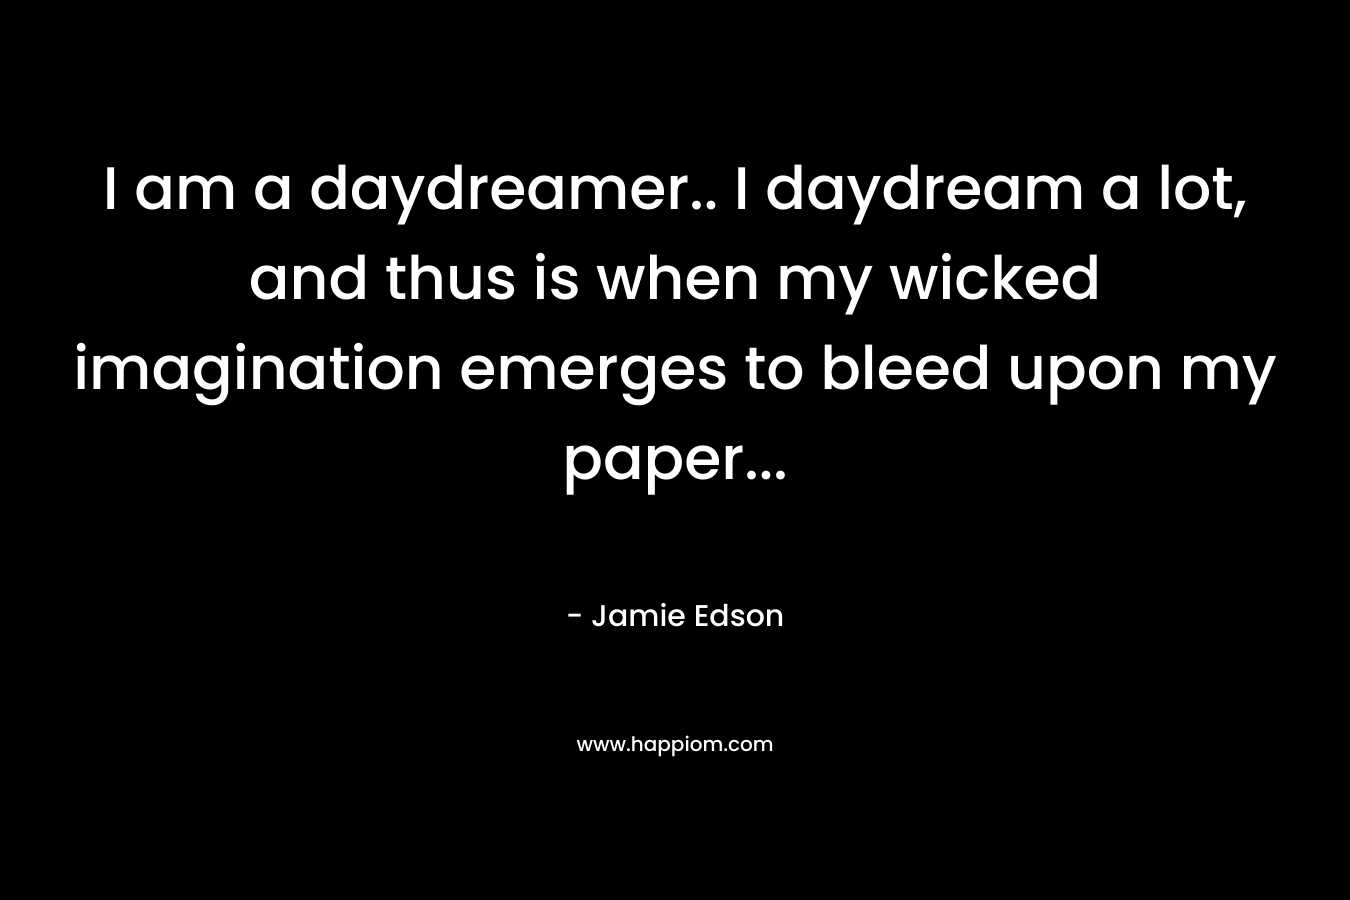 I am a daydreamer.. I daydream a lot, and thus is when my wicked imagination emerges to bleed upon my paper...